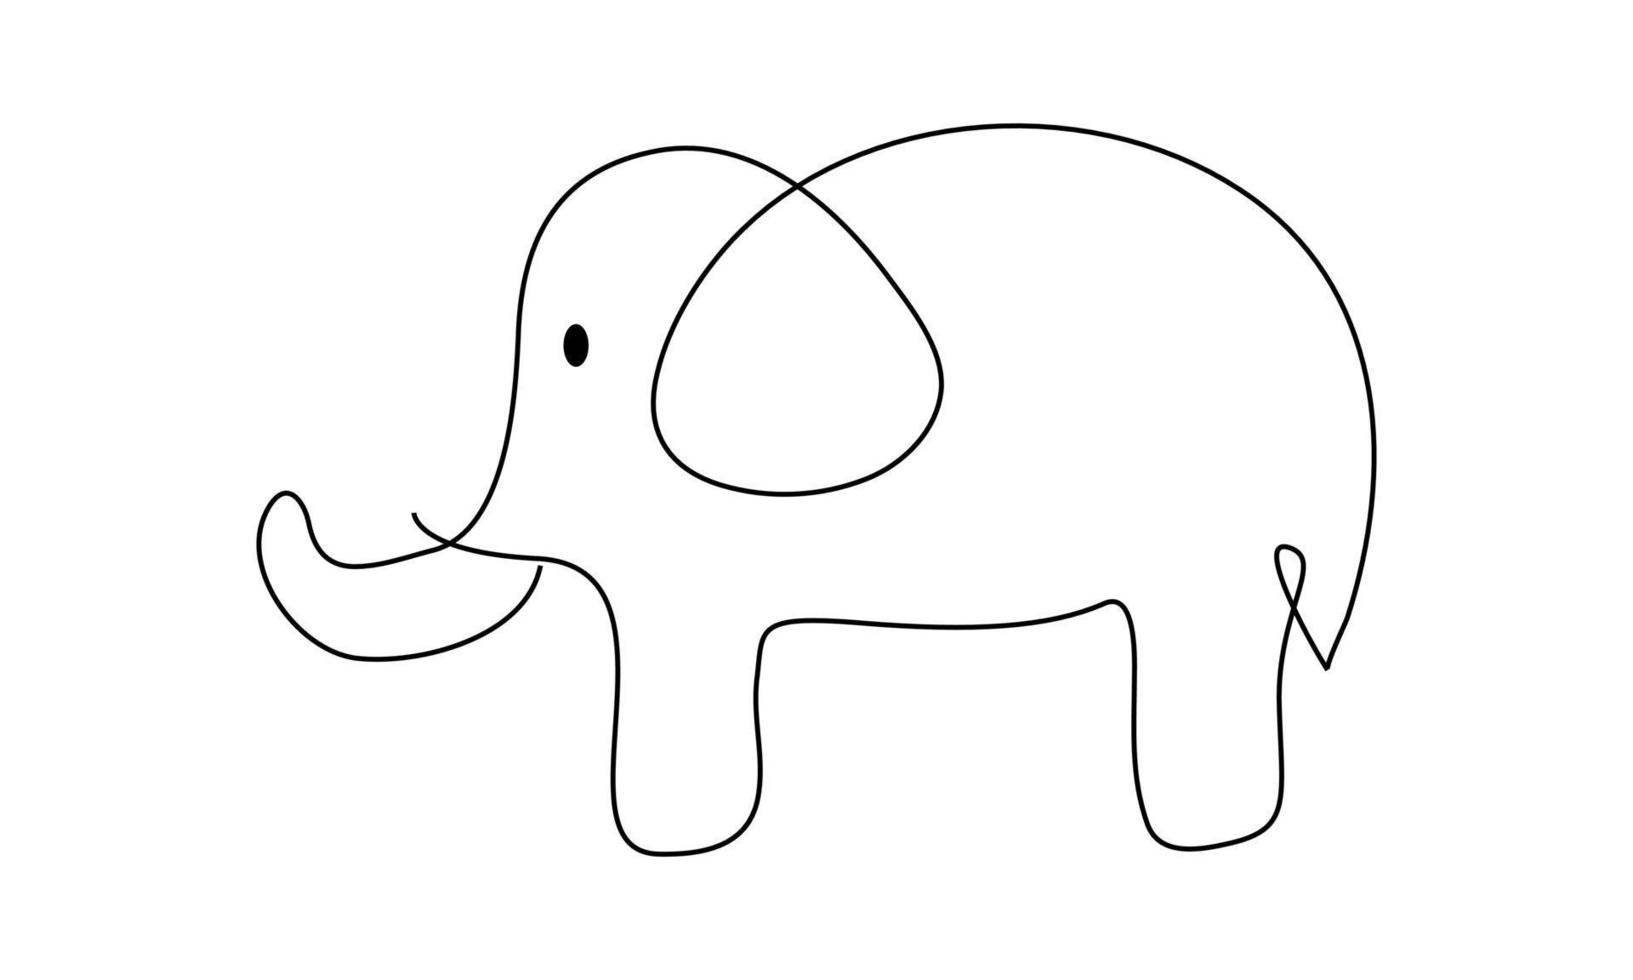 One line drawing, elephant vector illustration. Abstract wildlife animal minimalism style. Continuous hand drawn isolated on white background.